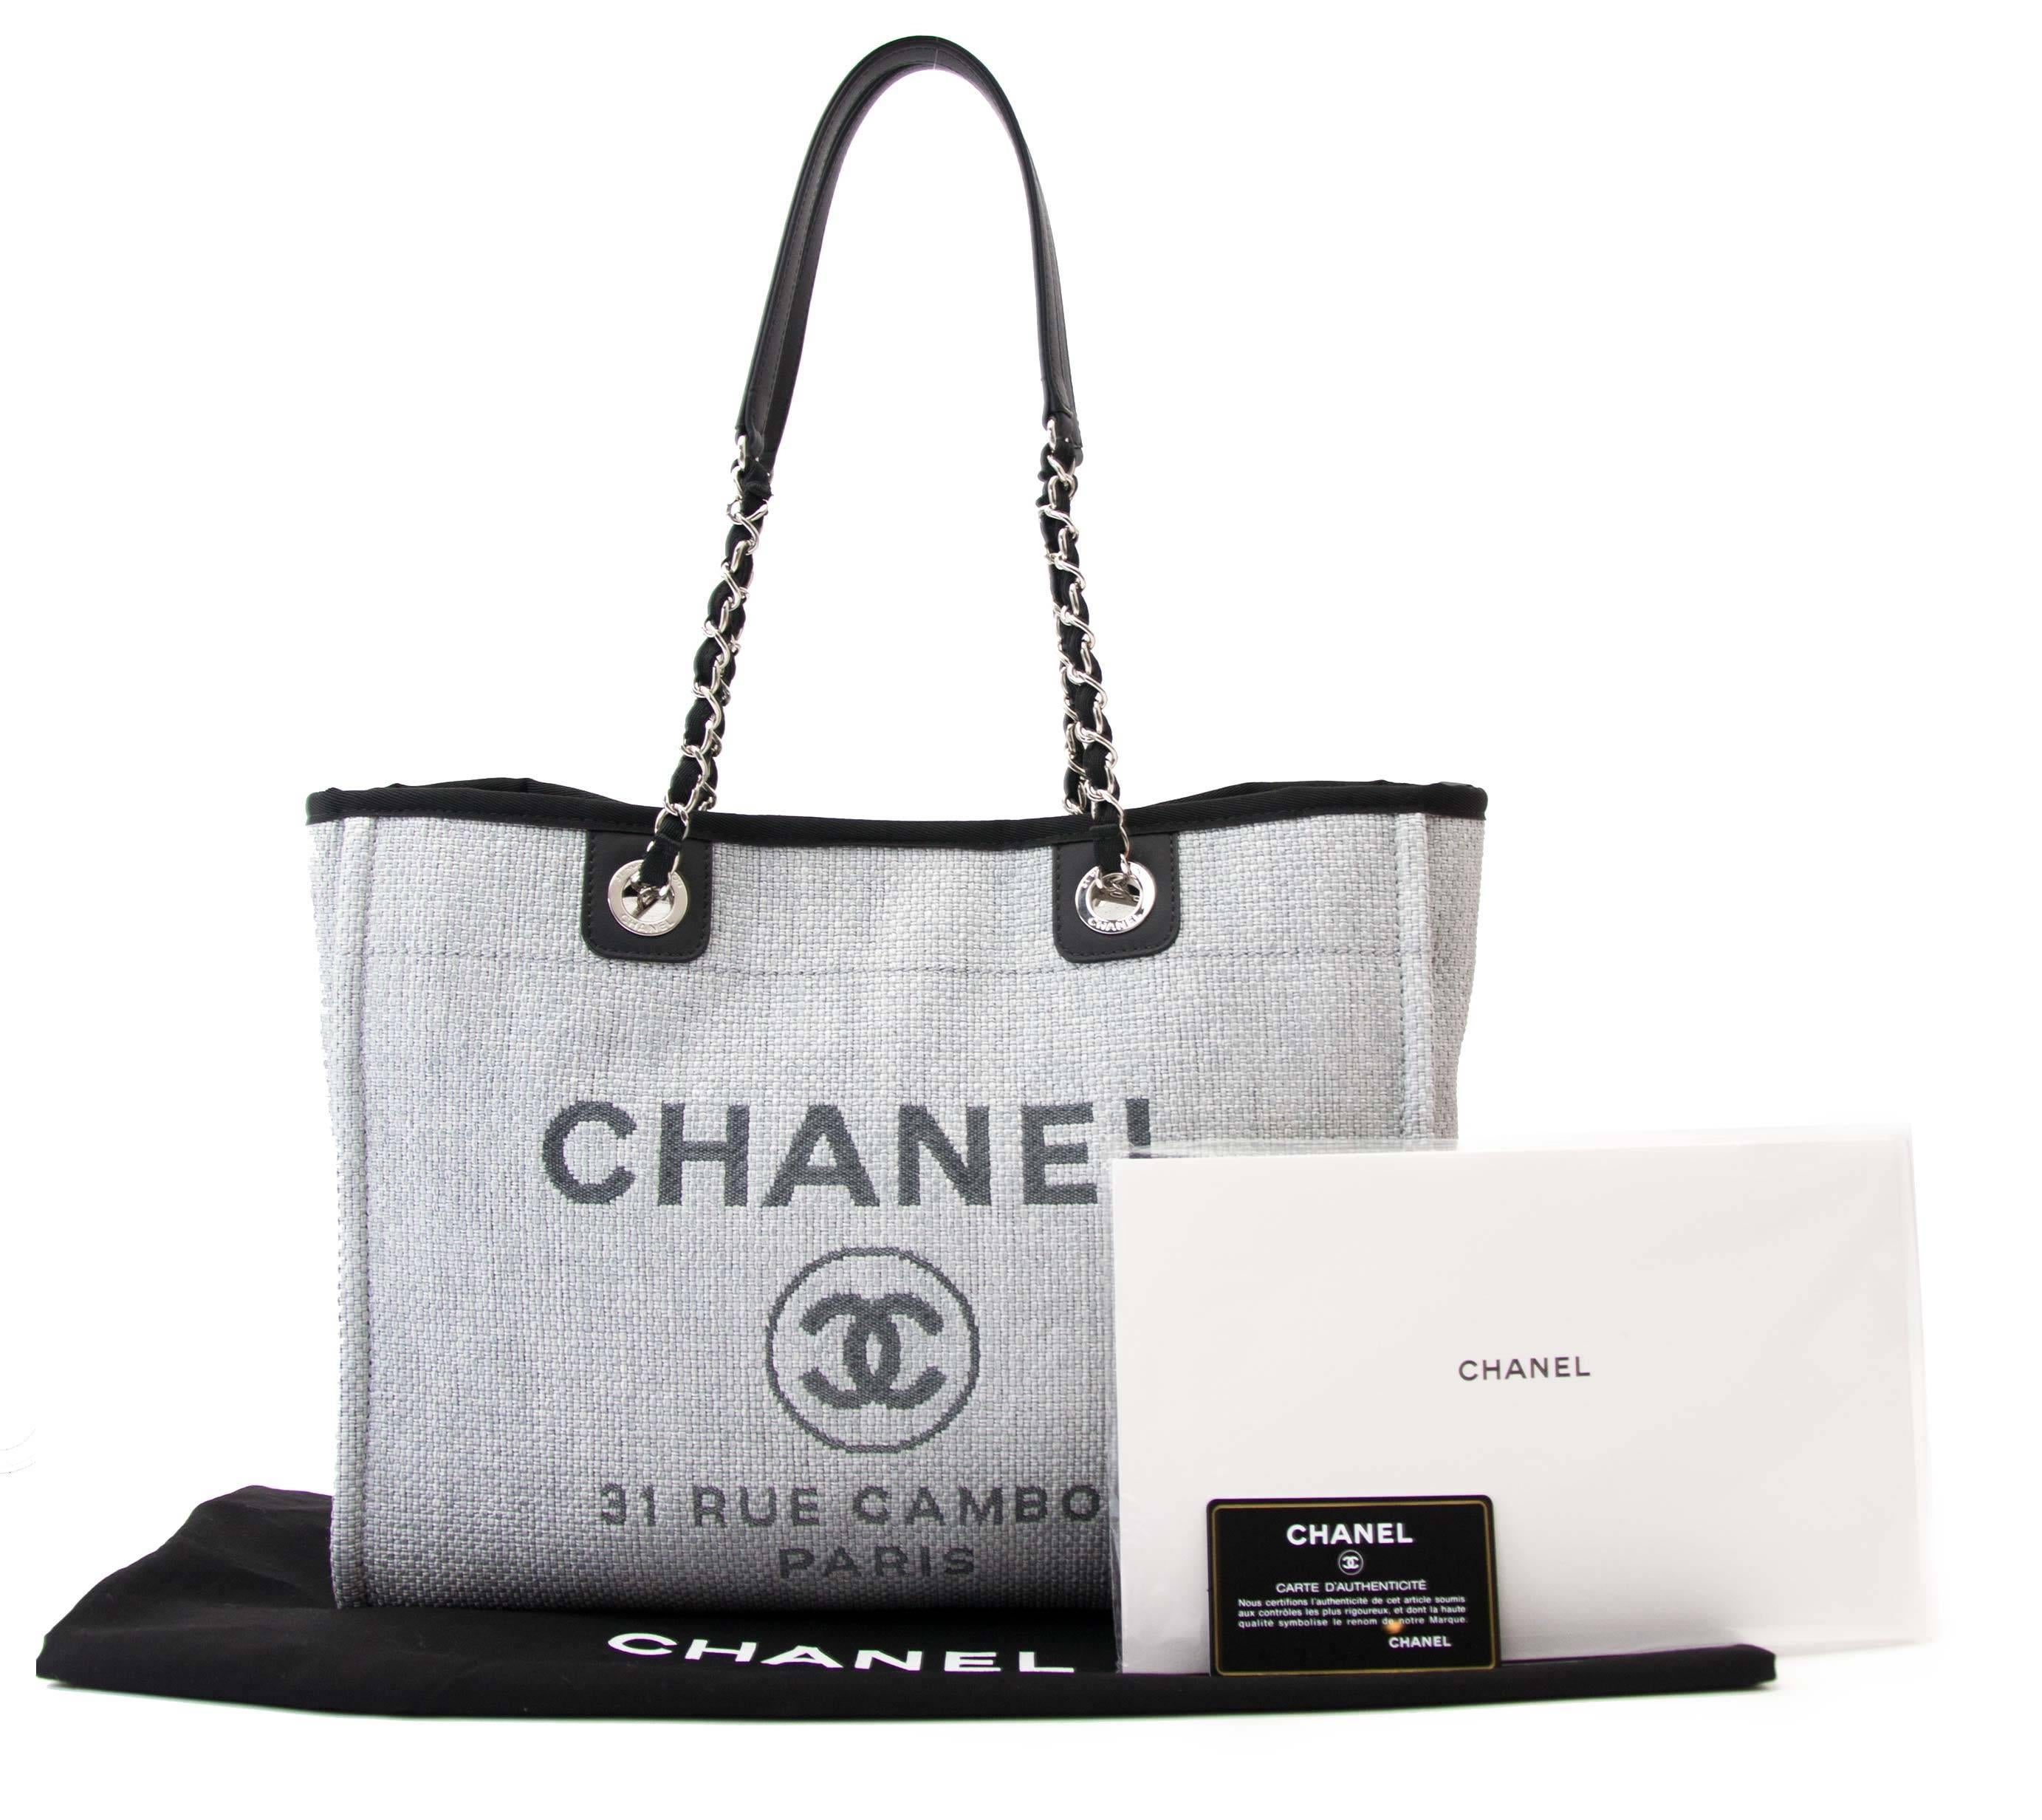 Chanel Deauville 31 Rue Cambon Tote Bag at 1stDibs | chanel 31 rue cambon  bag, chanel 31 rue cambon bag price, chanel rue cambon bag